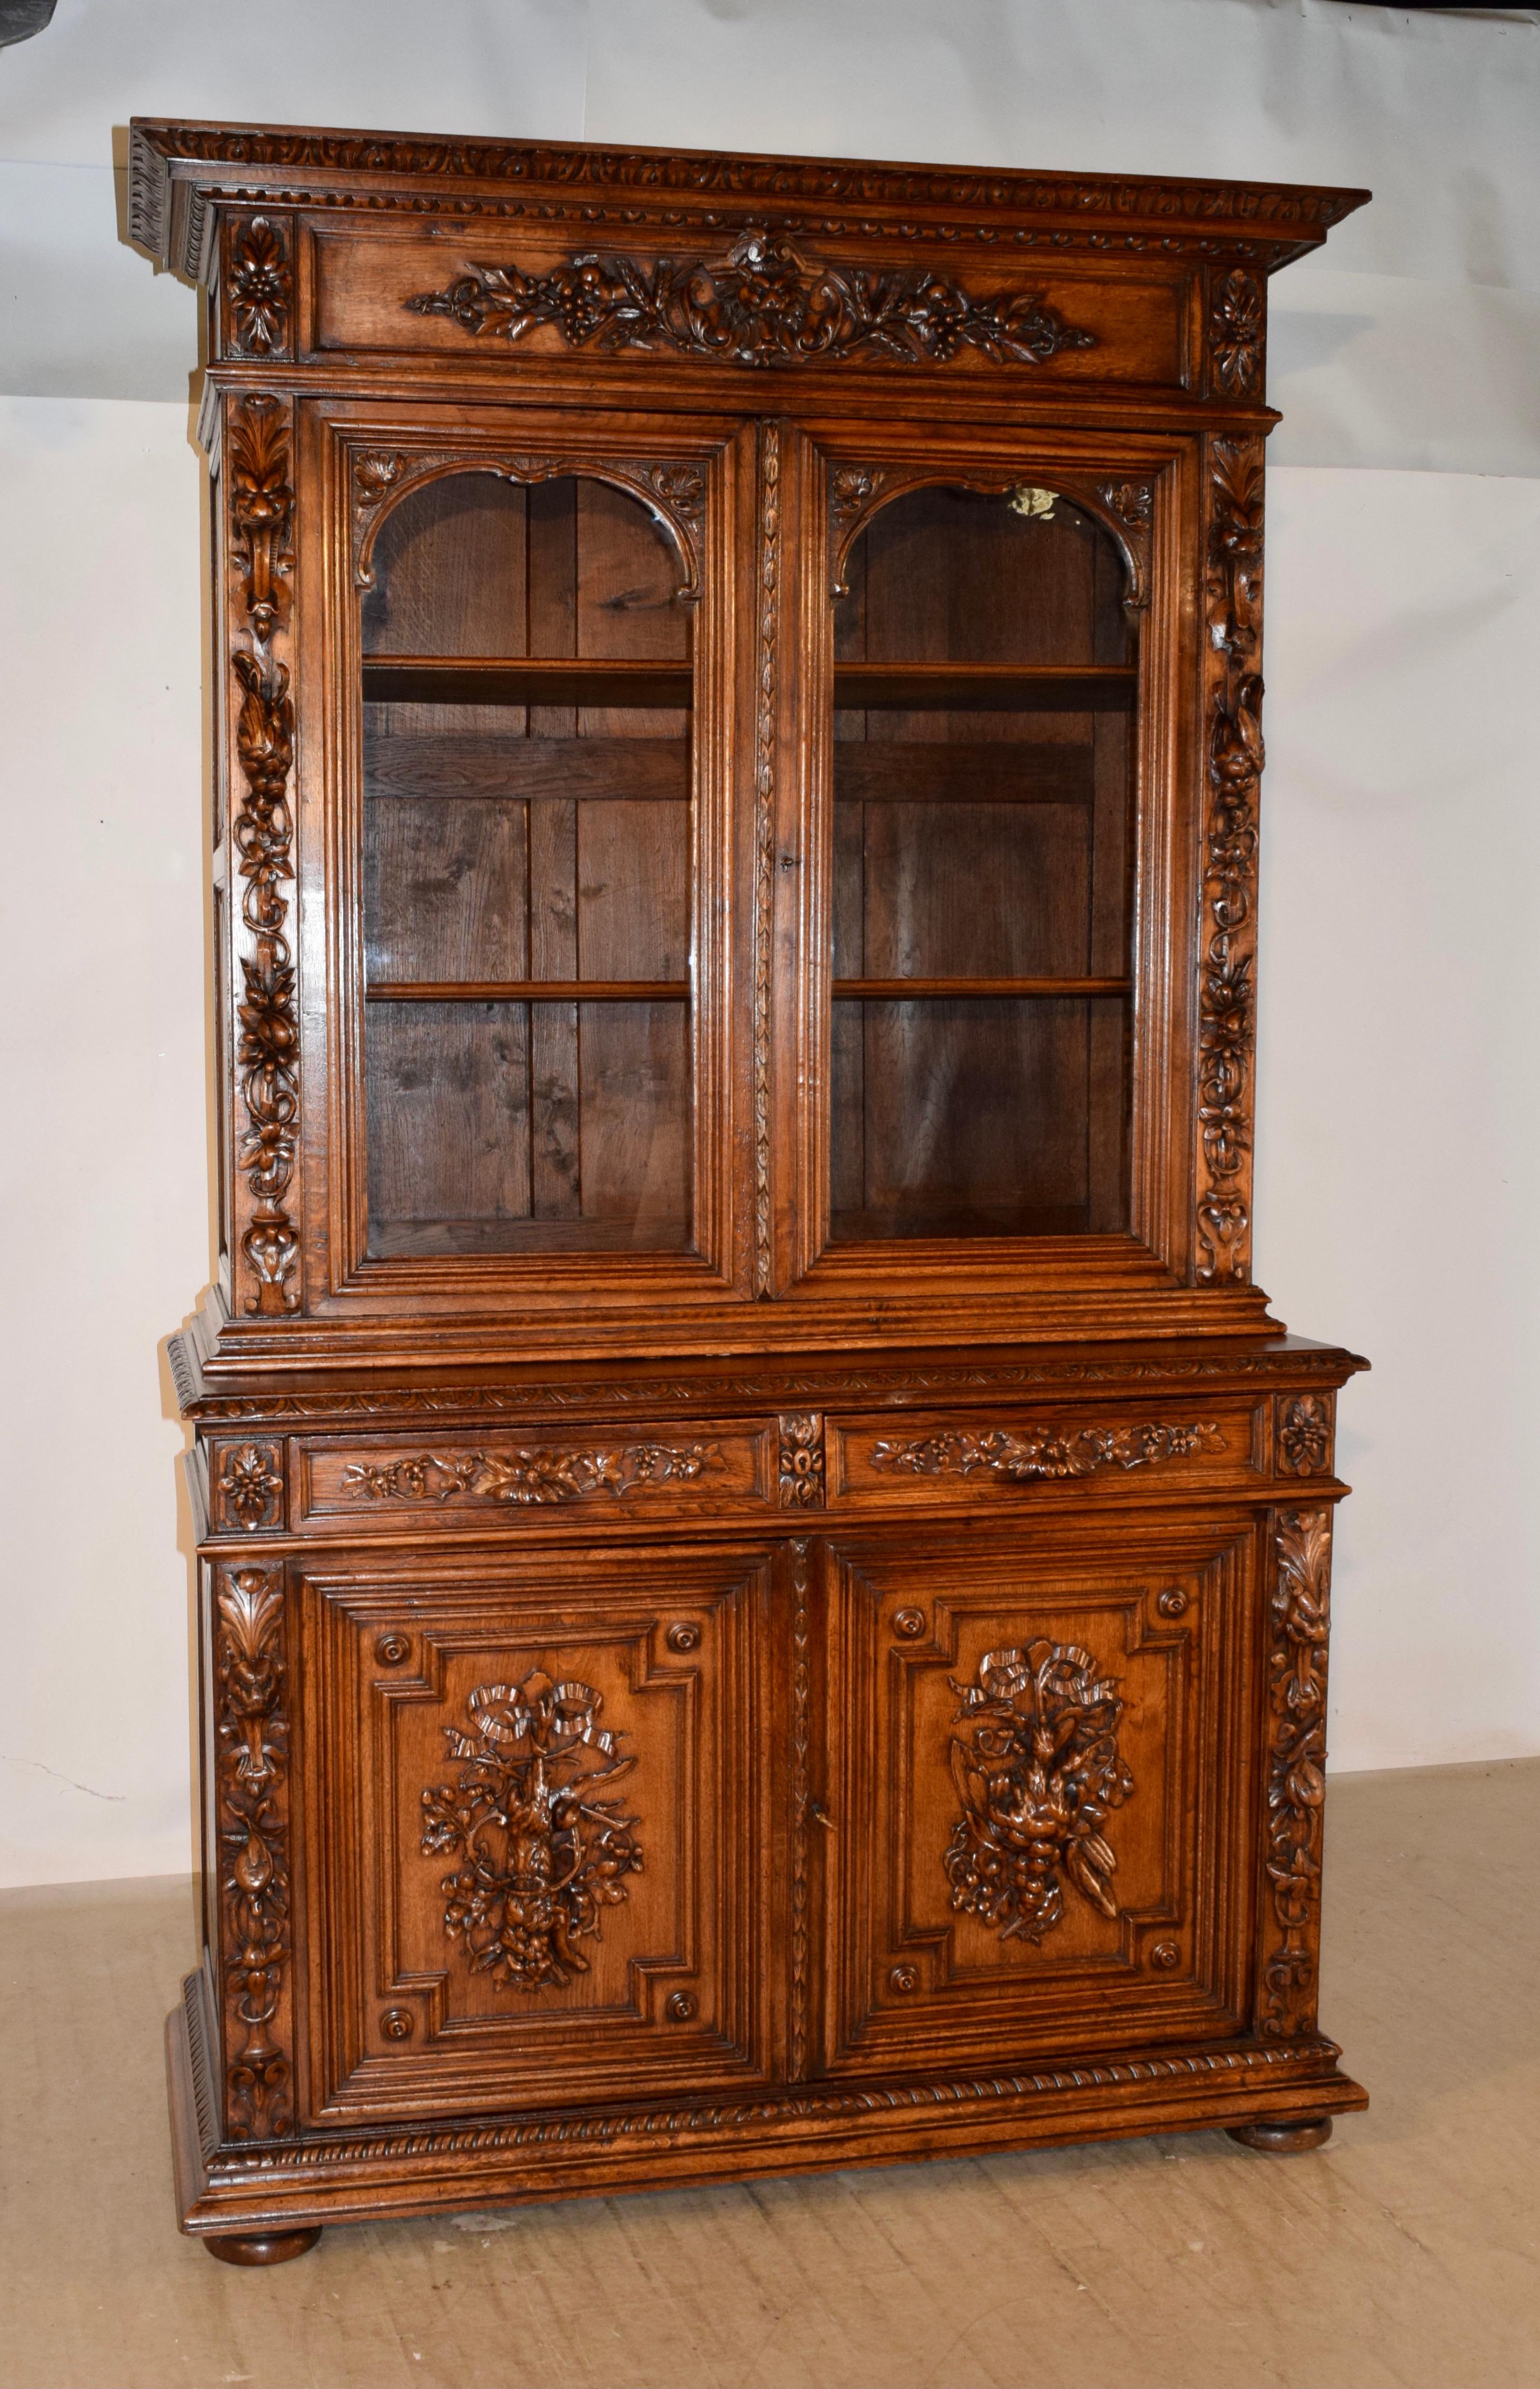 Exceptionally well-carved 19th century oak buffet deux corps from France. This two-piece cabinet features a wonderful hand carved decorated crown over a wonderful glazed door cabinet with the original glass doors. The sides of the cabinet have